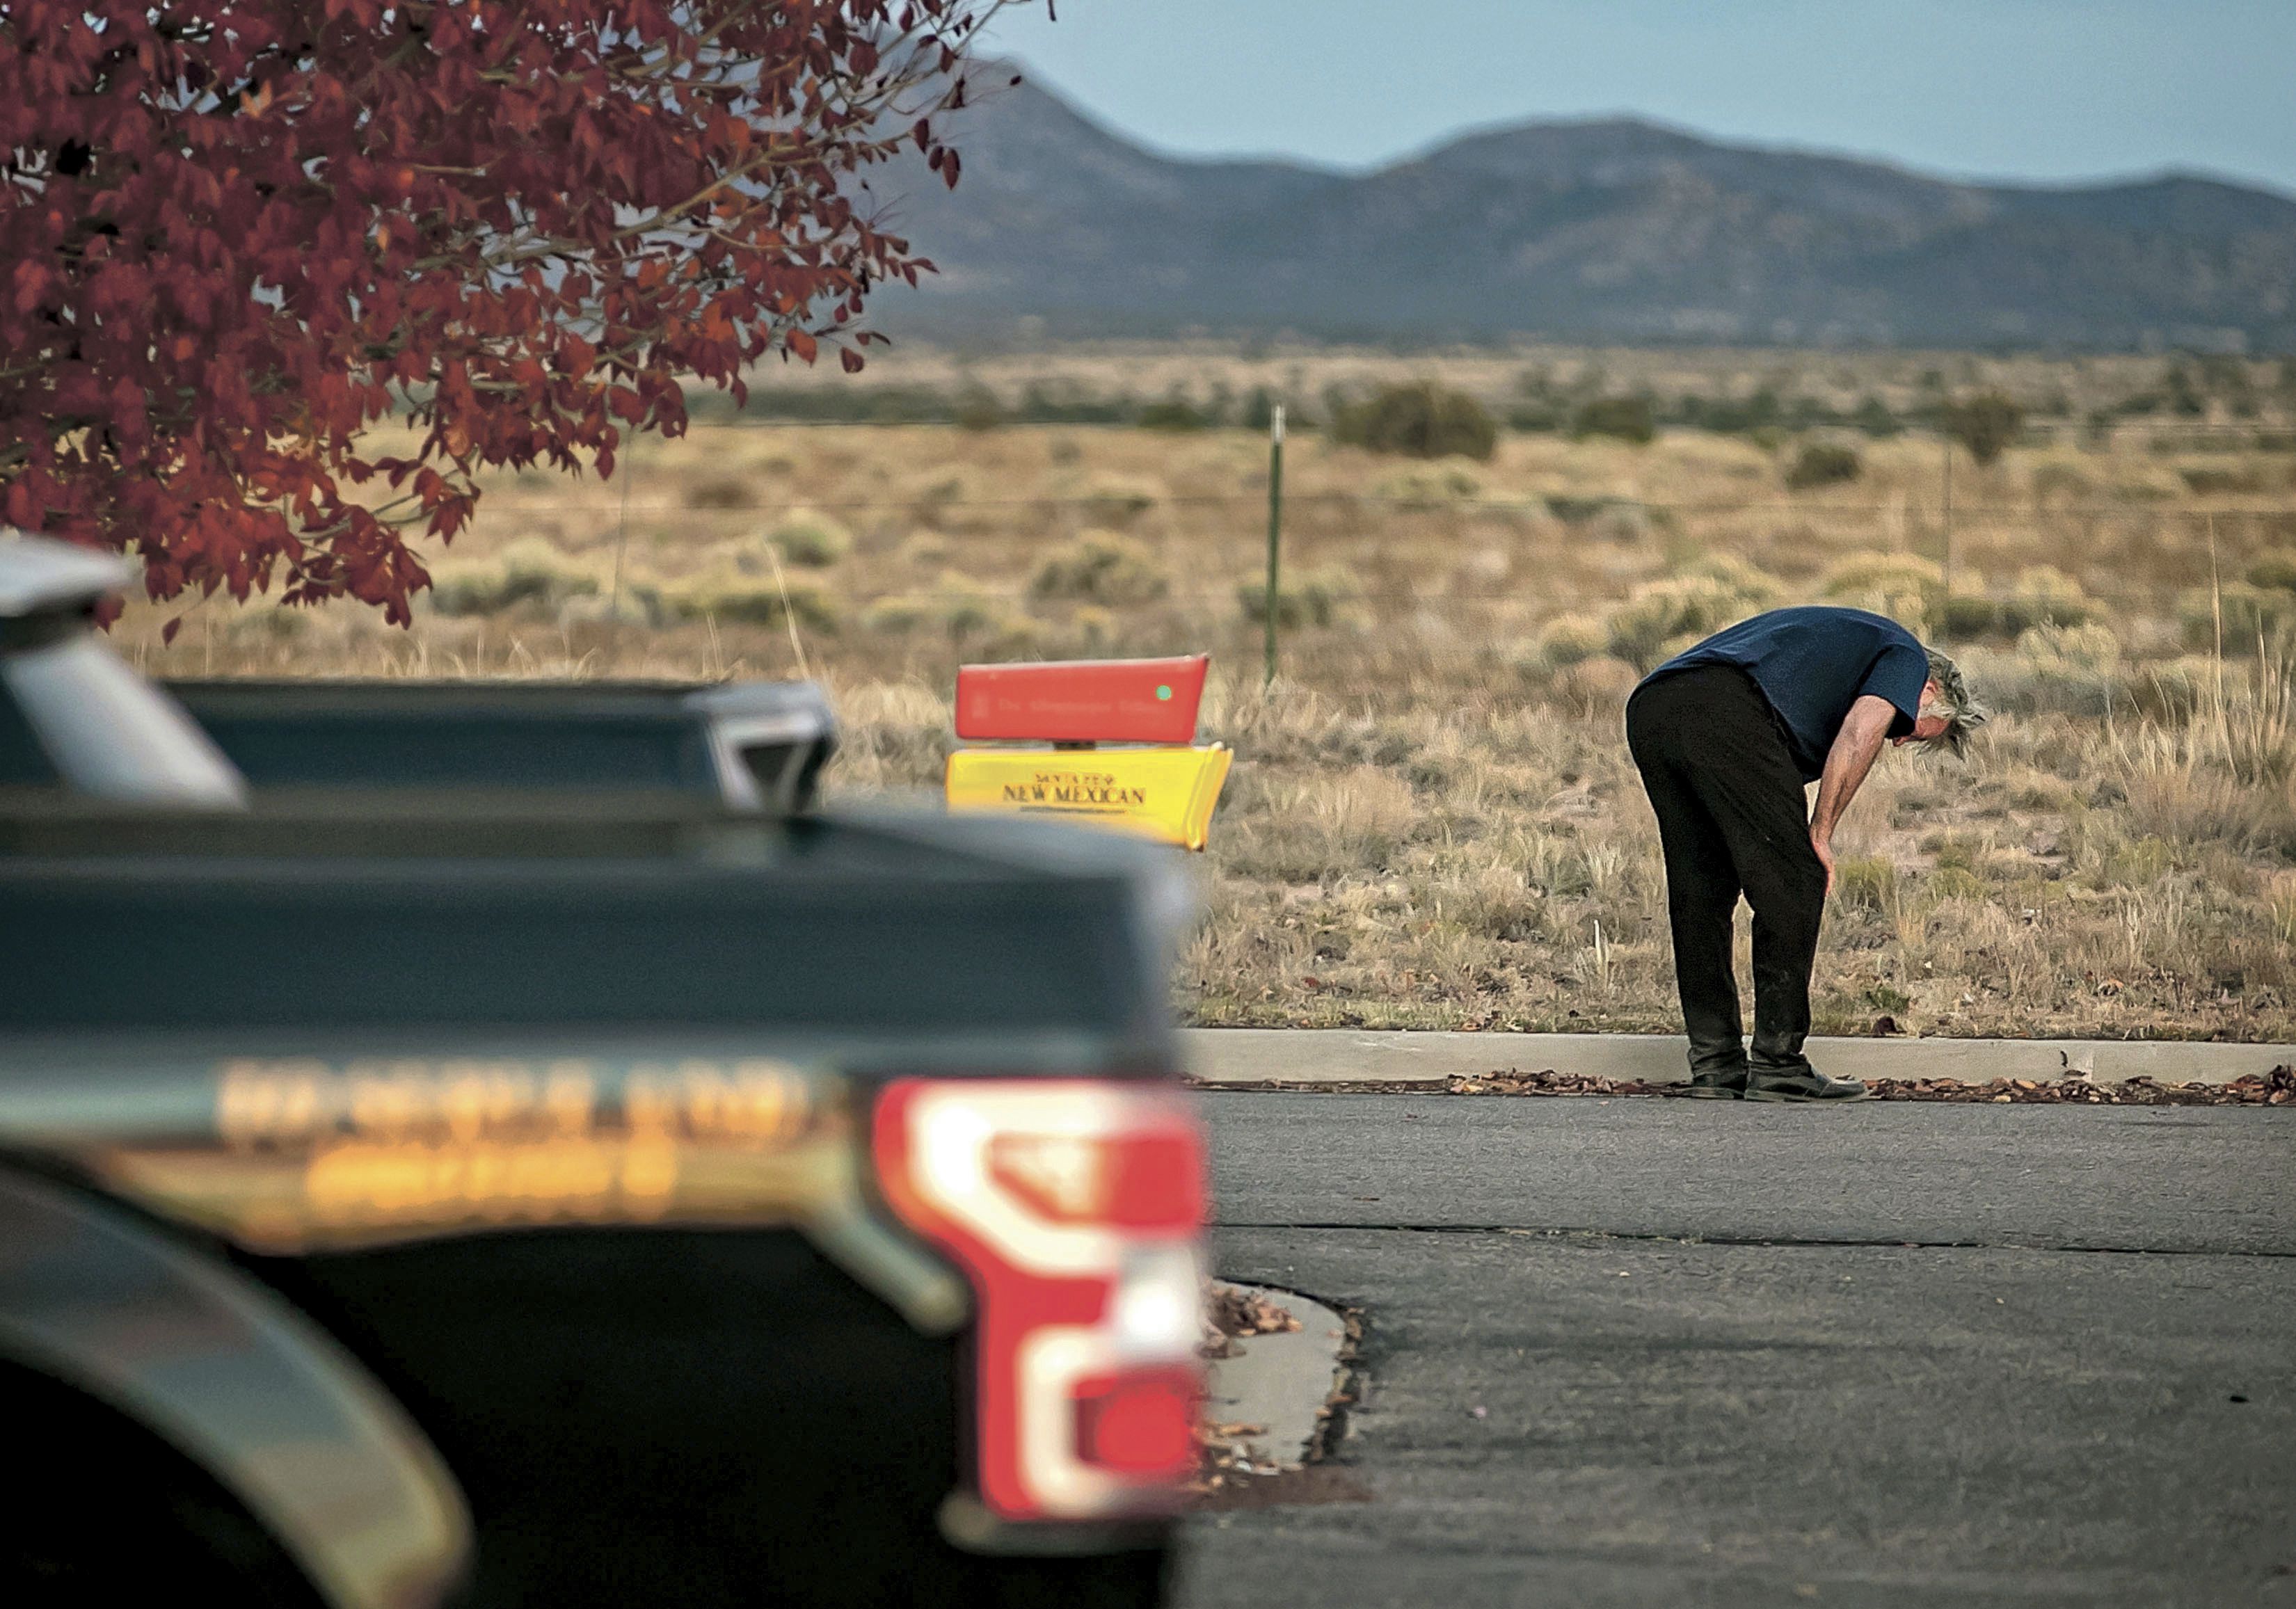 A distraught Alec Baldwin lingers in the parking lot outside the Santa Fe County Sheriff's Office in Santa Fe, N.M., after he was questioned about a shooting on the set of the film "Rust" on the outskirts of Santa Fe, Thursday, Oct. 21, 2021. Baldwin fired a prop gun on the set, killing cinematographer Halyna Hutchins and wounding director Joel Souza, officials said. (Jim Weber/Santa Fe New Mexican via AP)